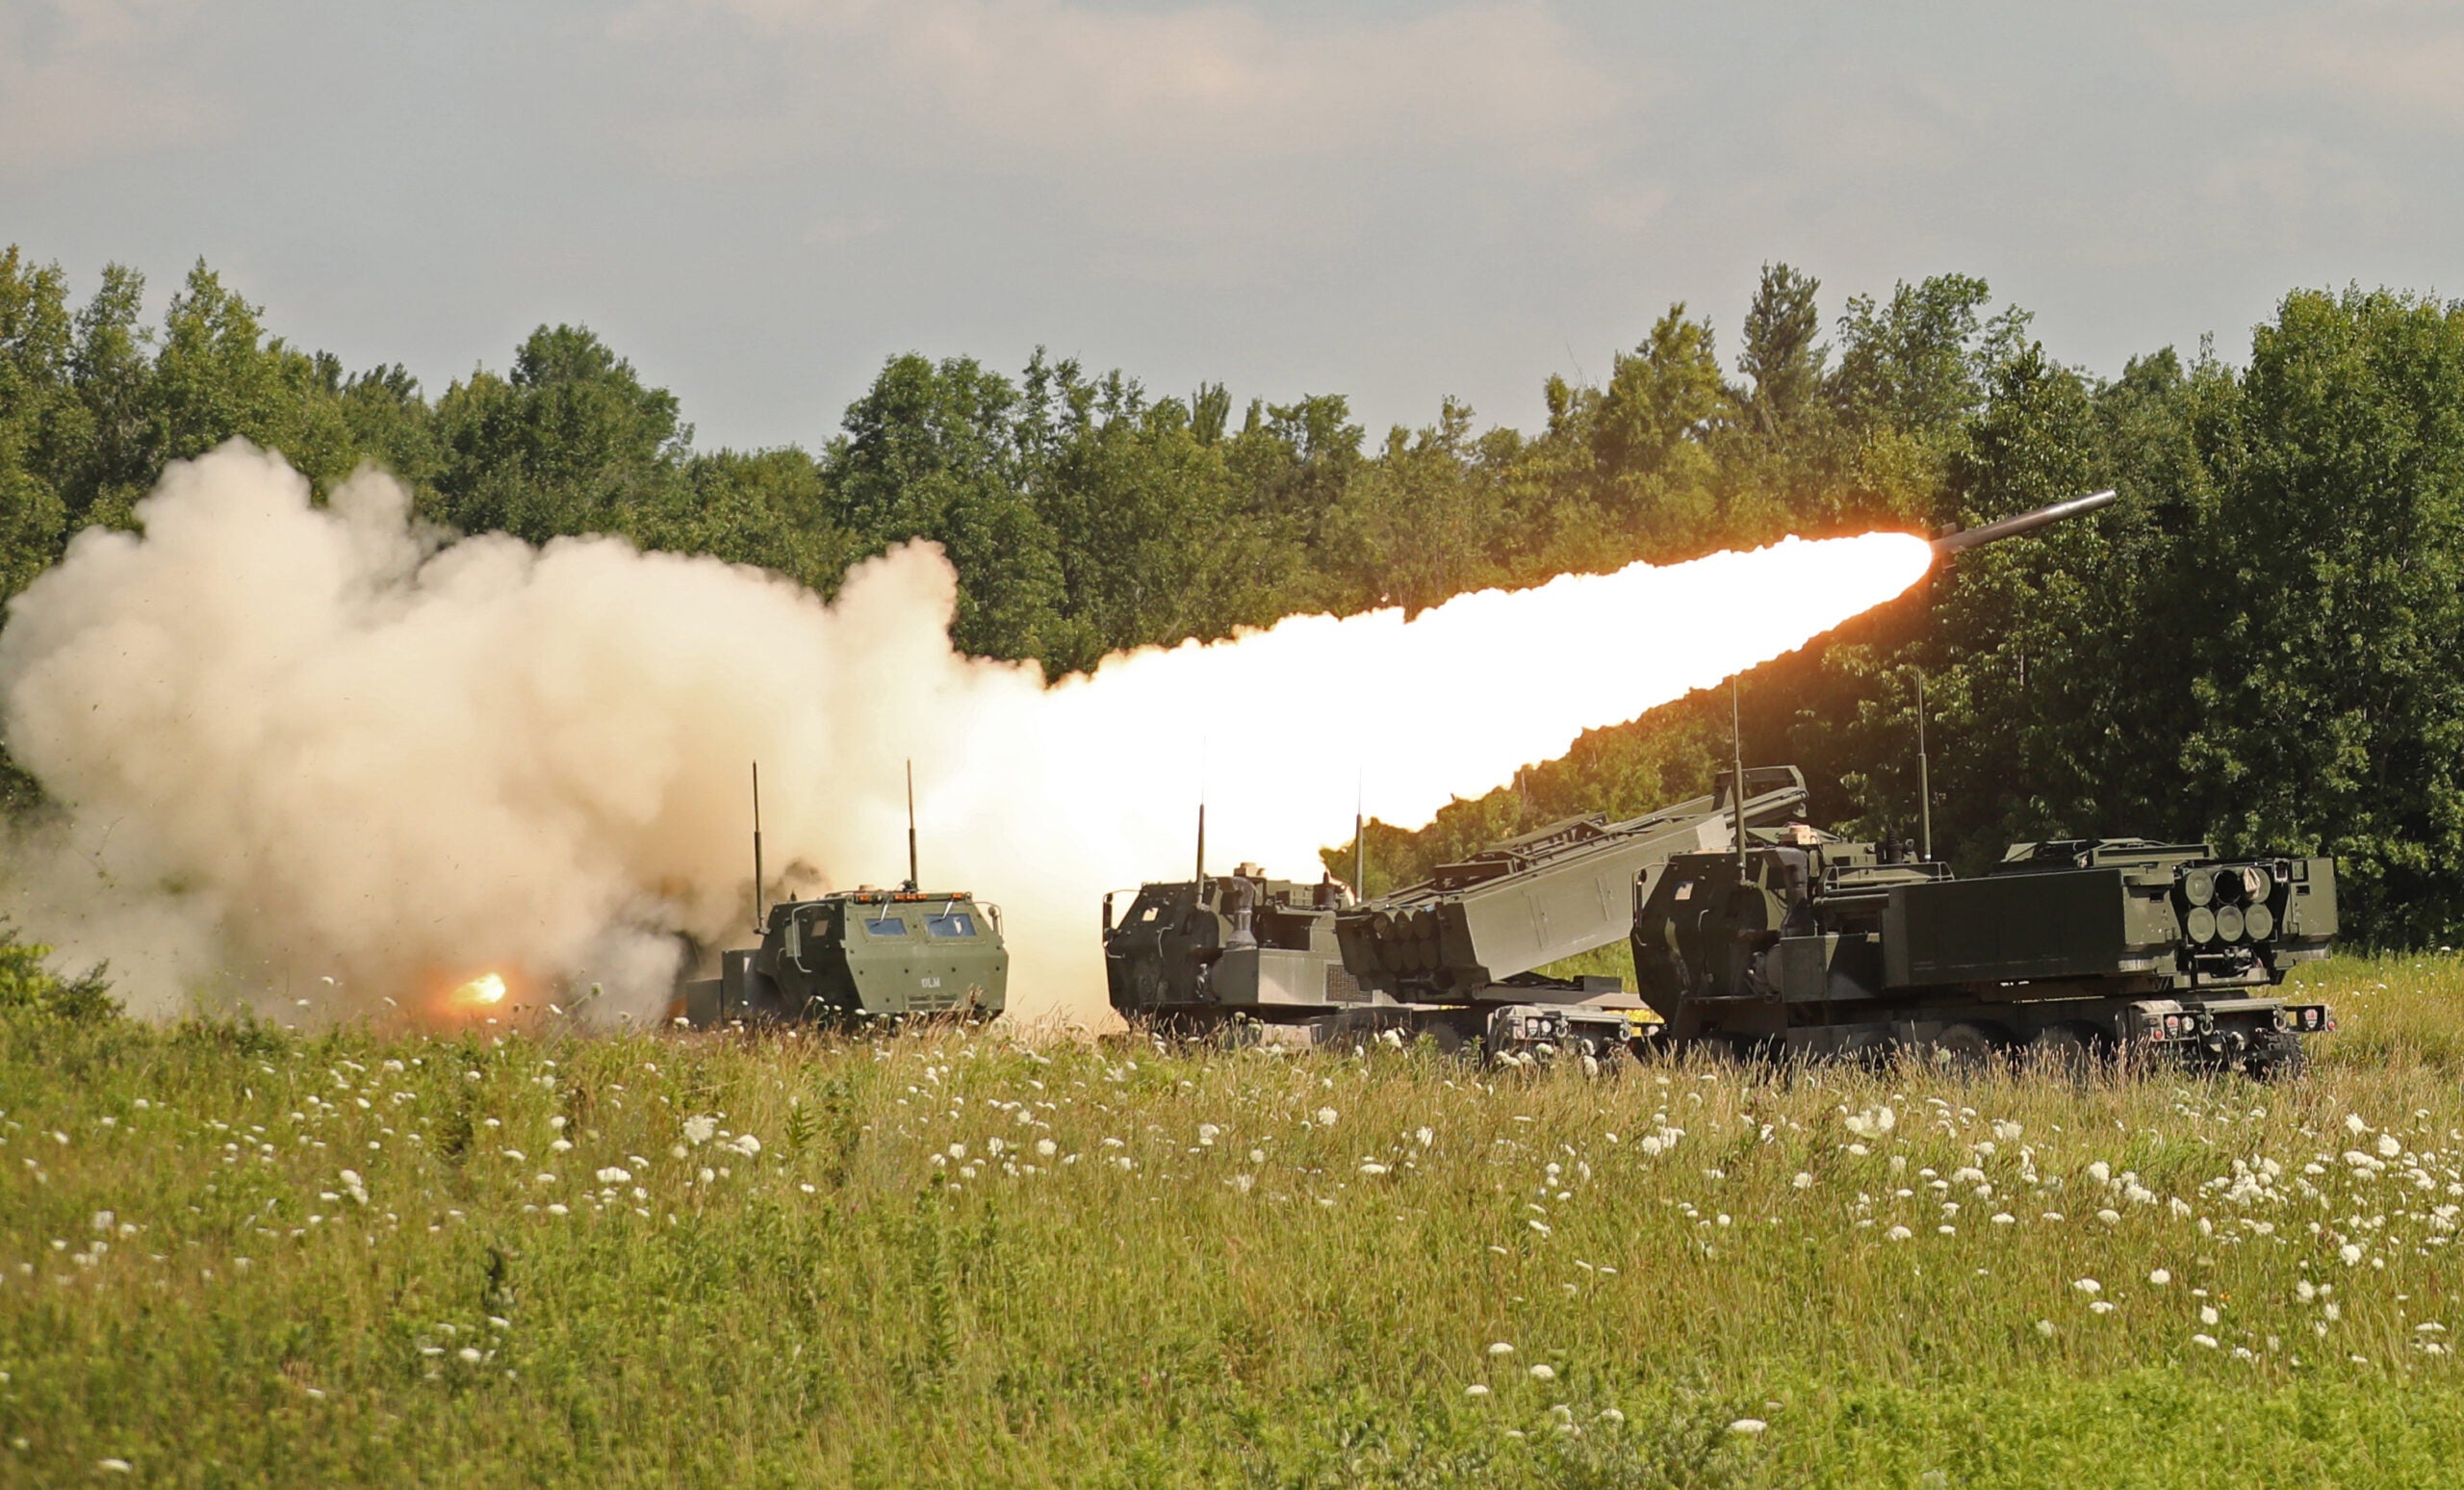 197 Field Artillery Regiment of New Hampshire fires rockets at Fort Drum in preparation for an upcoming deployment